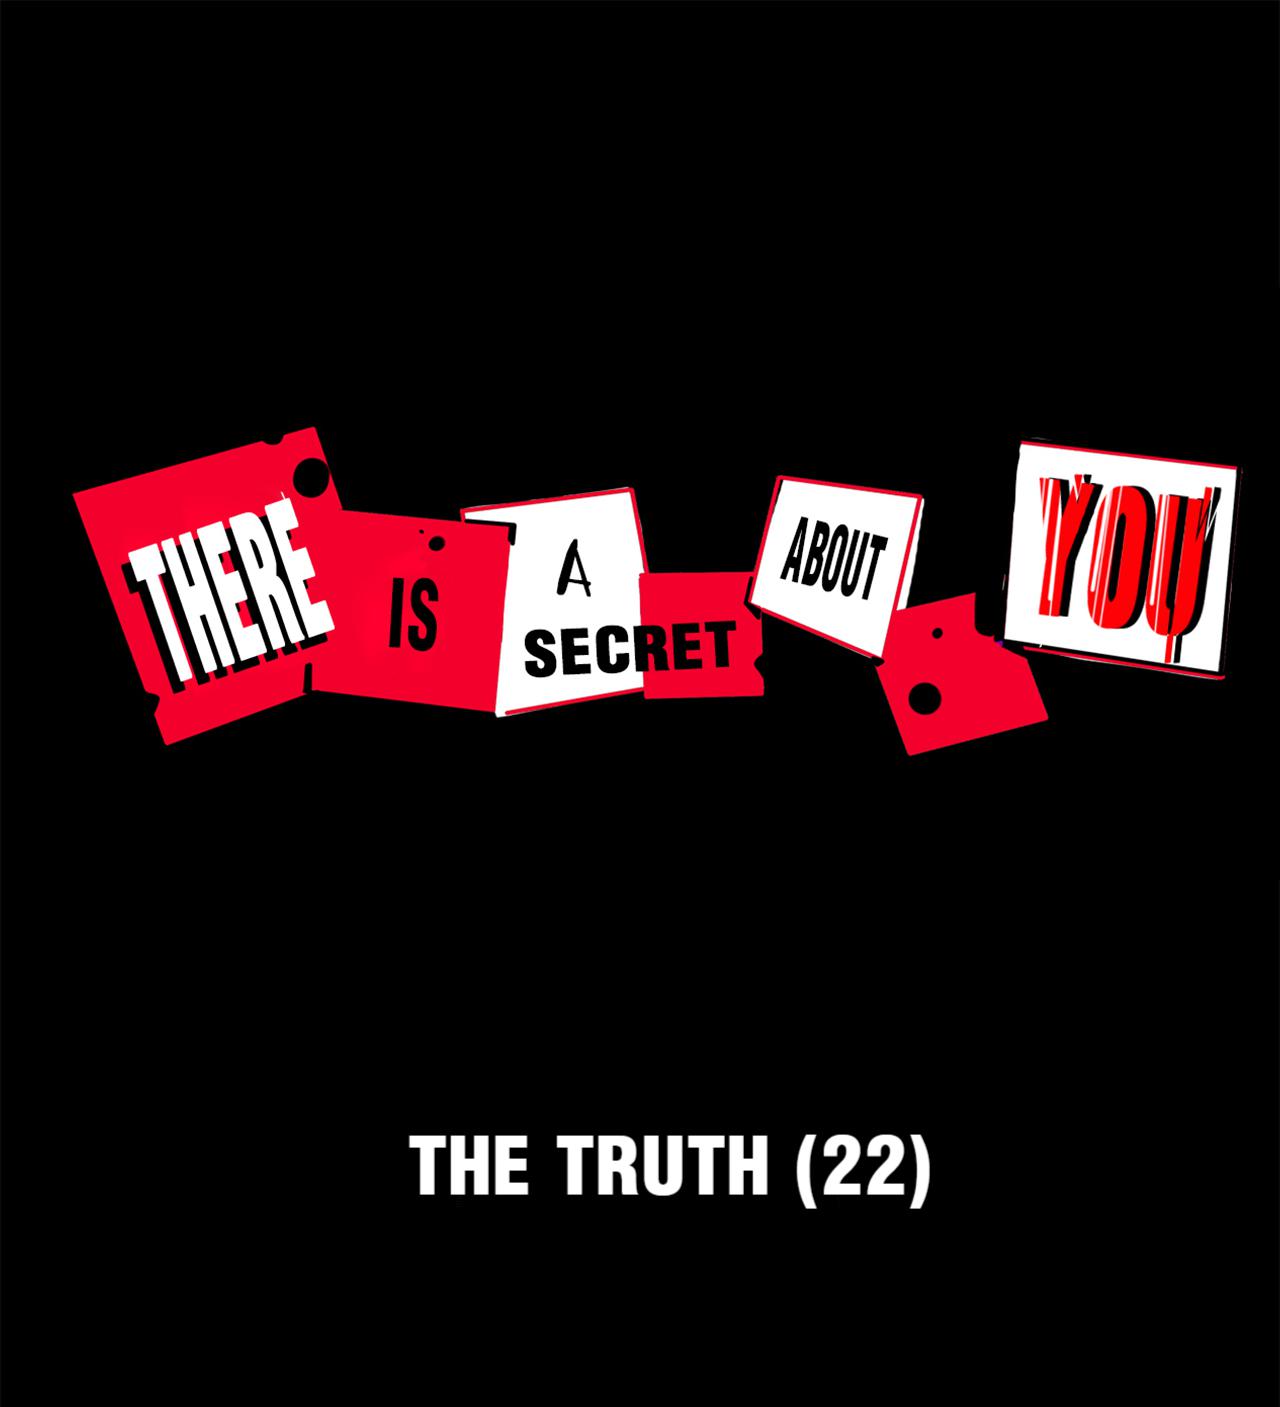 There Is a Secret About You 55